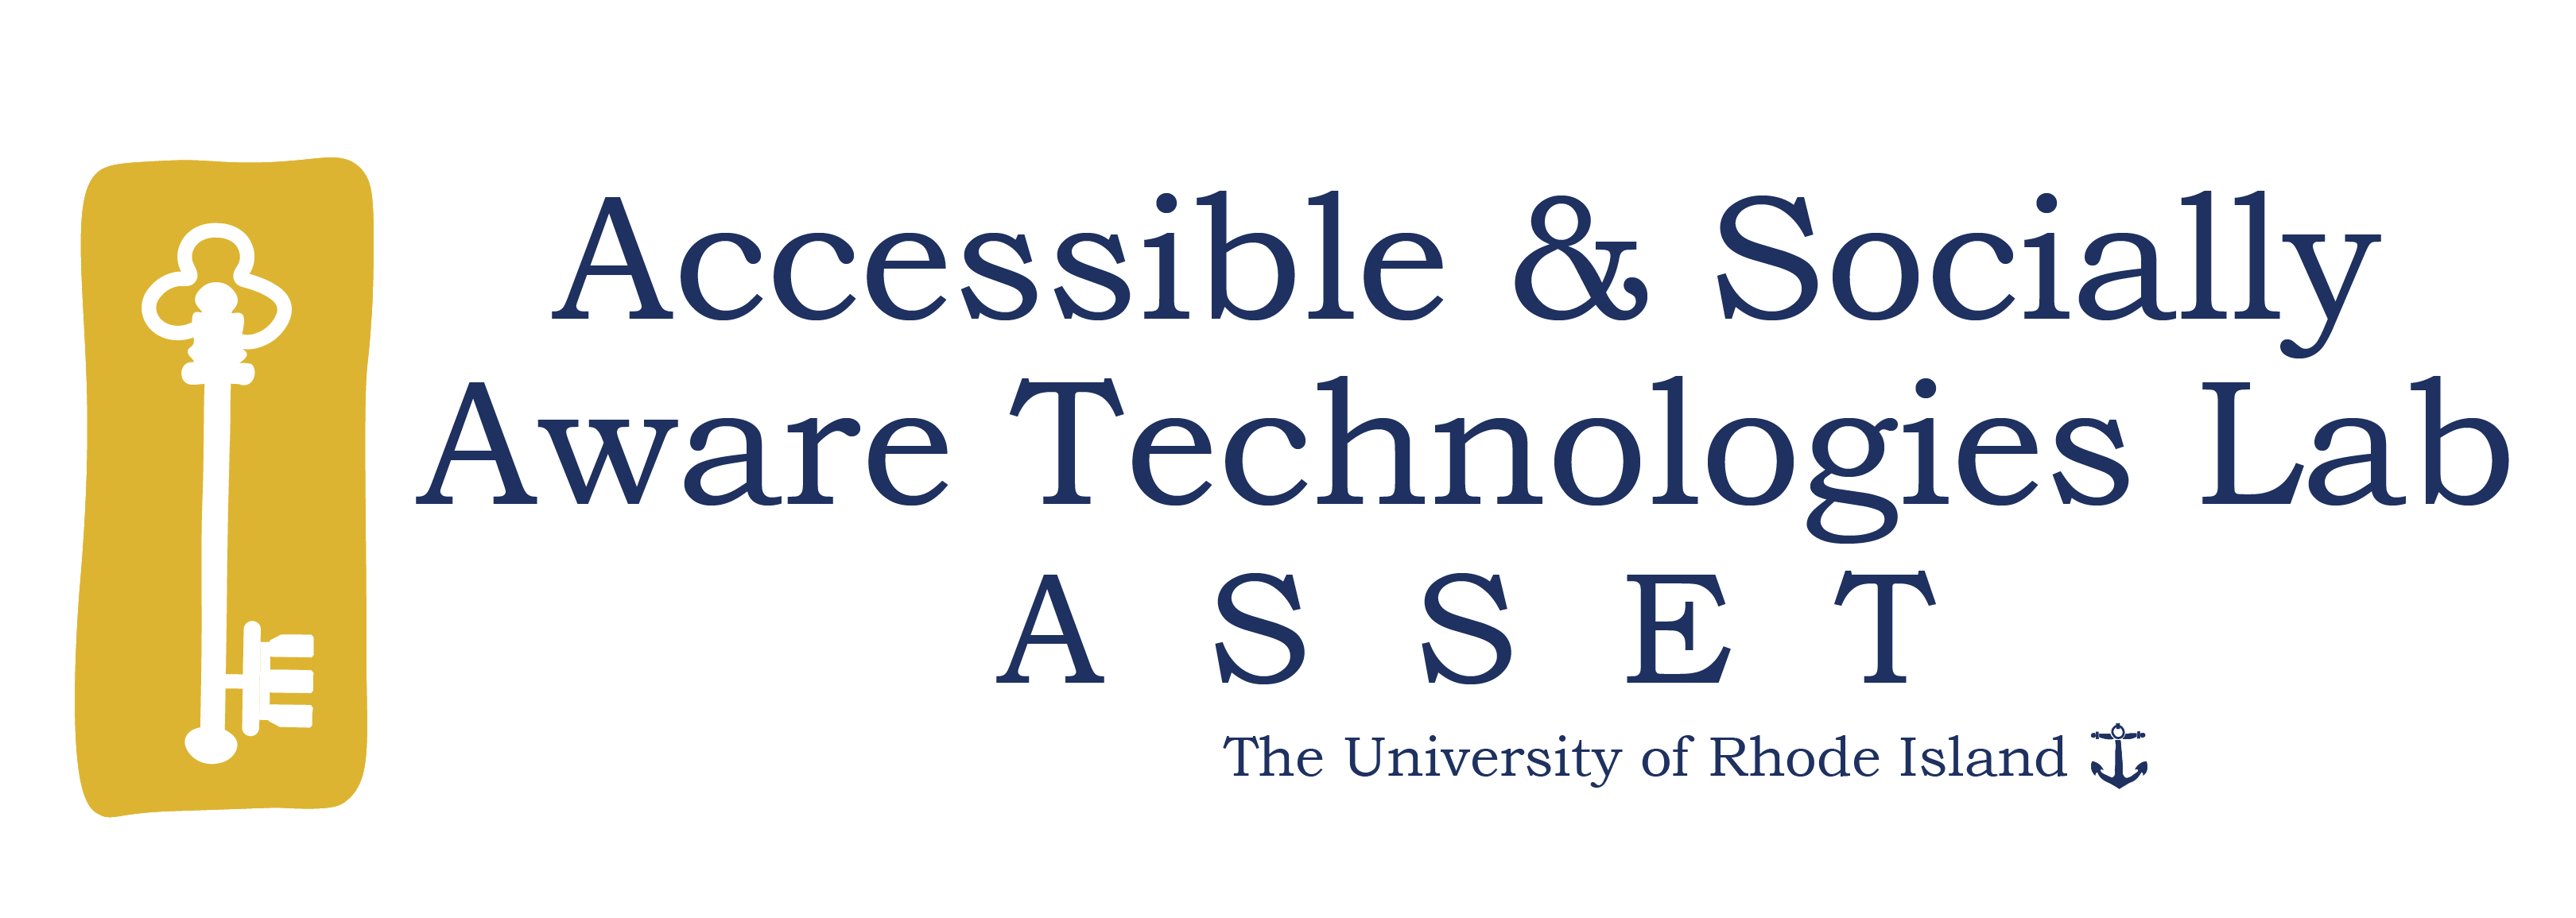 Logo of the Accessible and Socially Aware Technologies (ASSET) lab at the University of Rhode Island. The logo is a vertical image of a key on a mustard colored background with the names of the ASSET group written to its side.